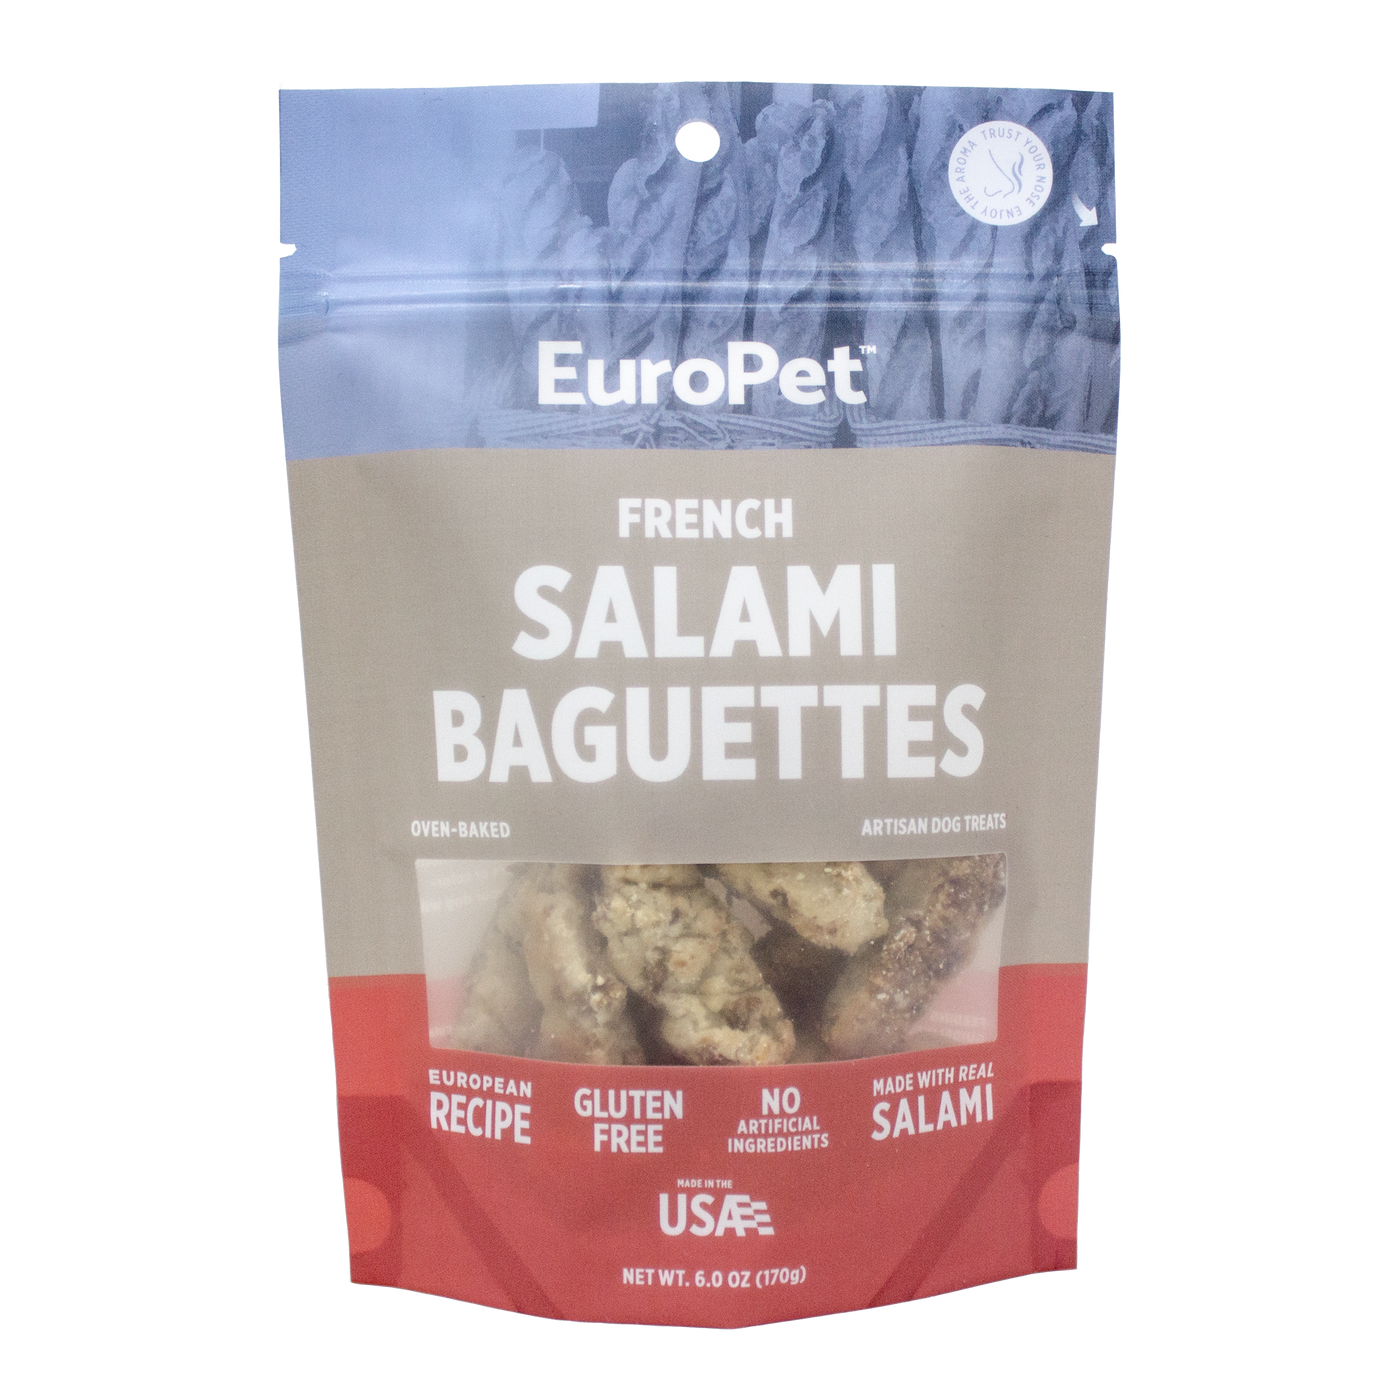 French Salami Baguettes CASE (Box of 6)